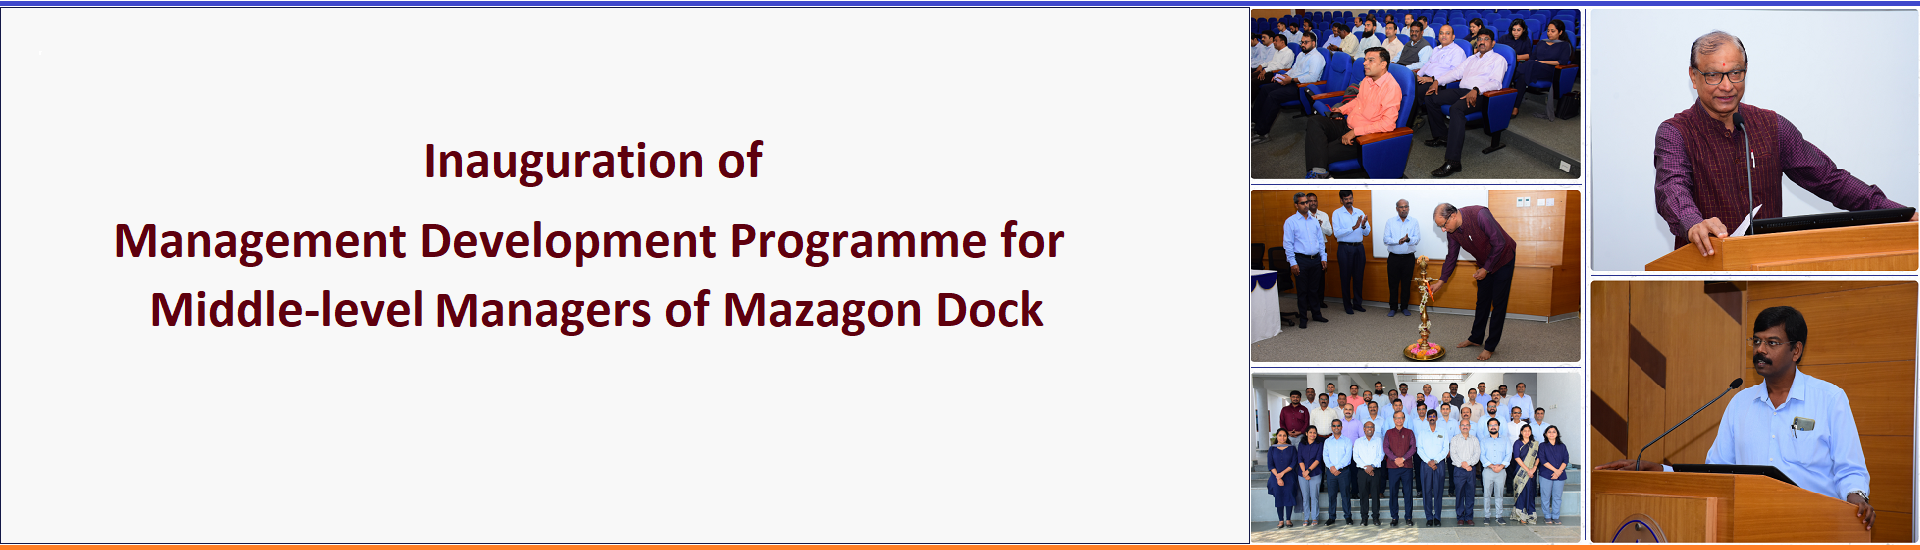 Inauguration of MDP programme for Middle-level Managers of Mazagon Dock